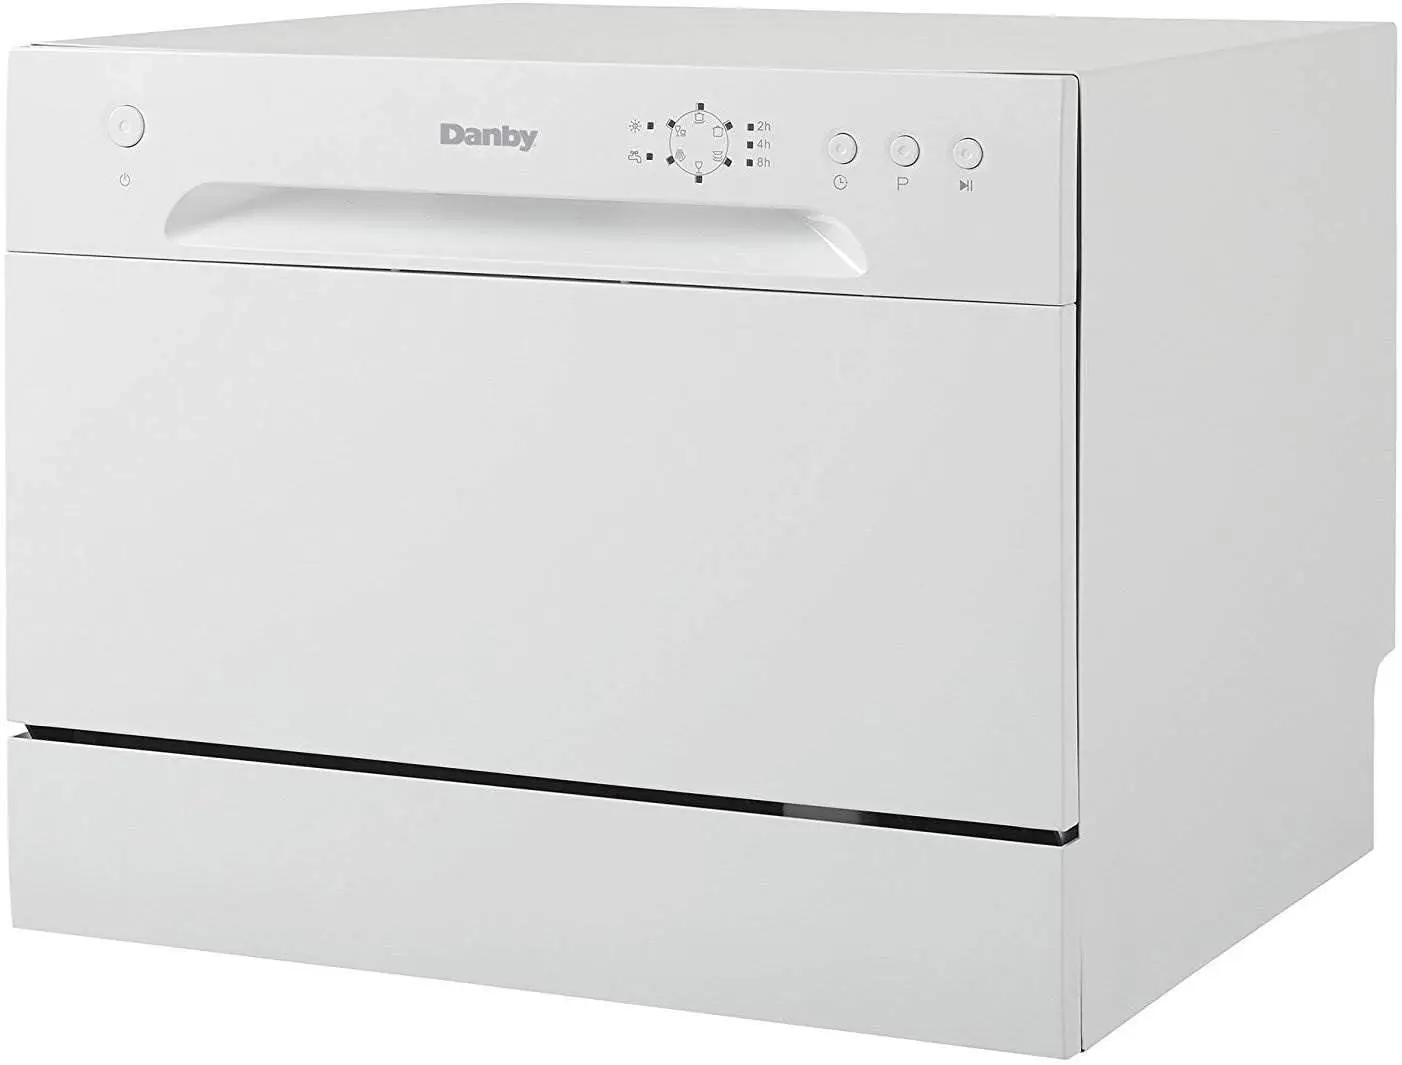 

Danby DDW621WDB Countertop Dishwasher with 6 Place Settings, 6 Wash Cycles and Silverware Basket, Energy